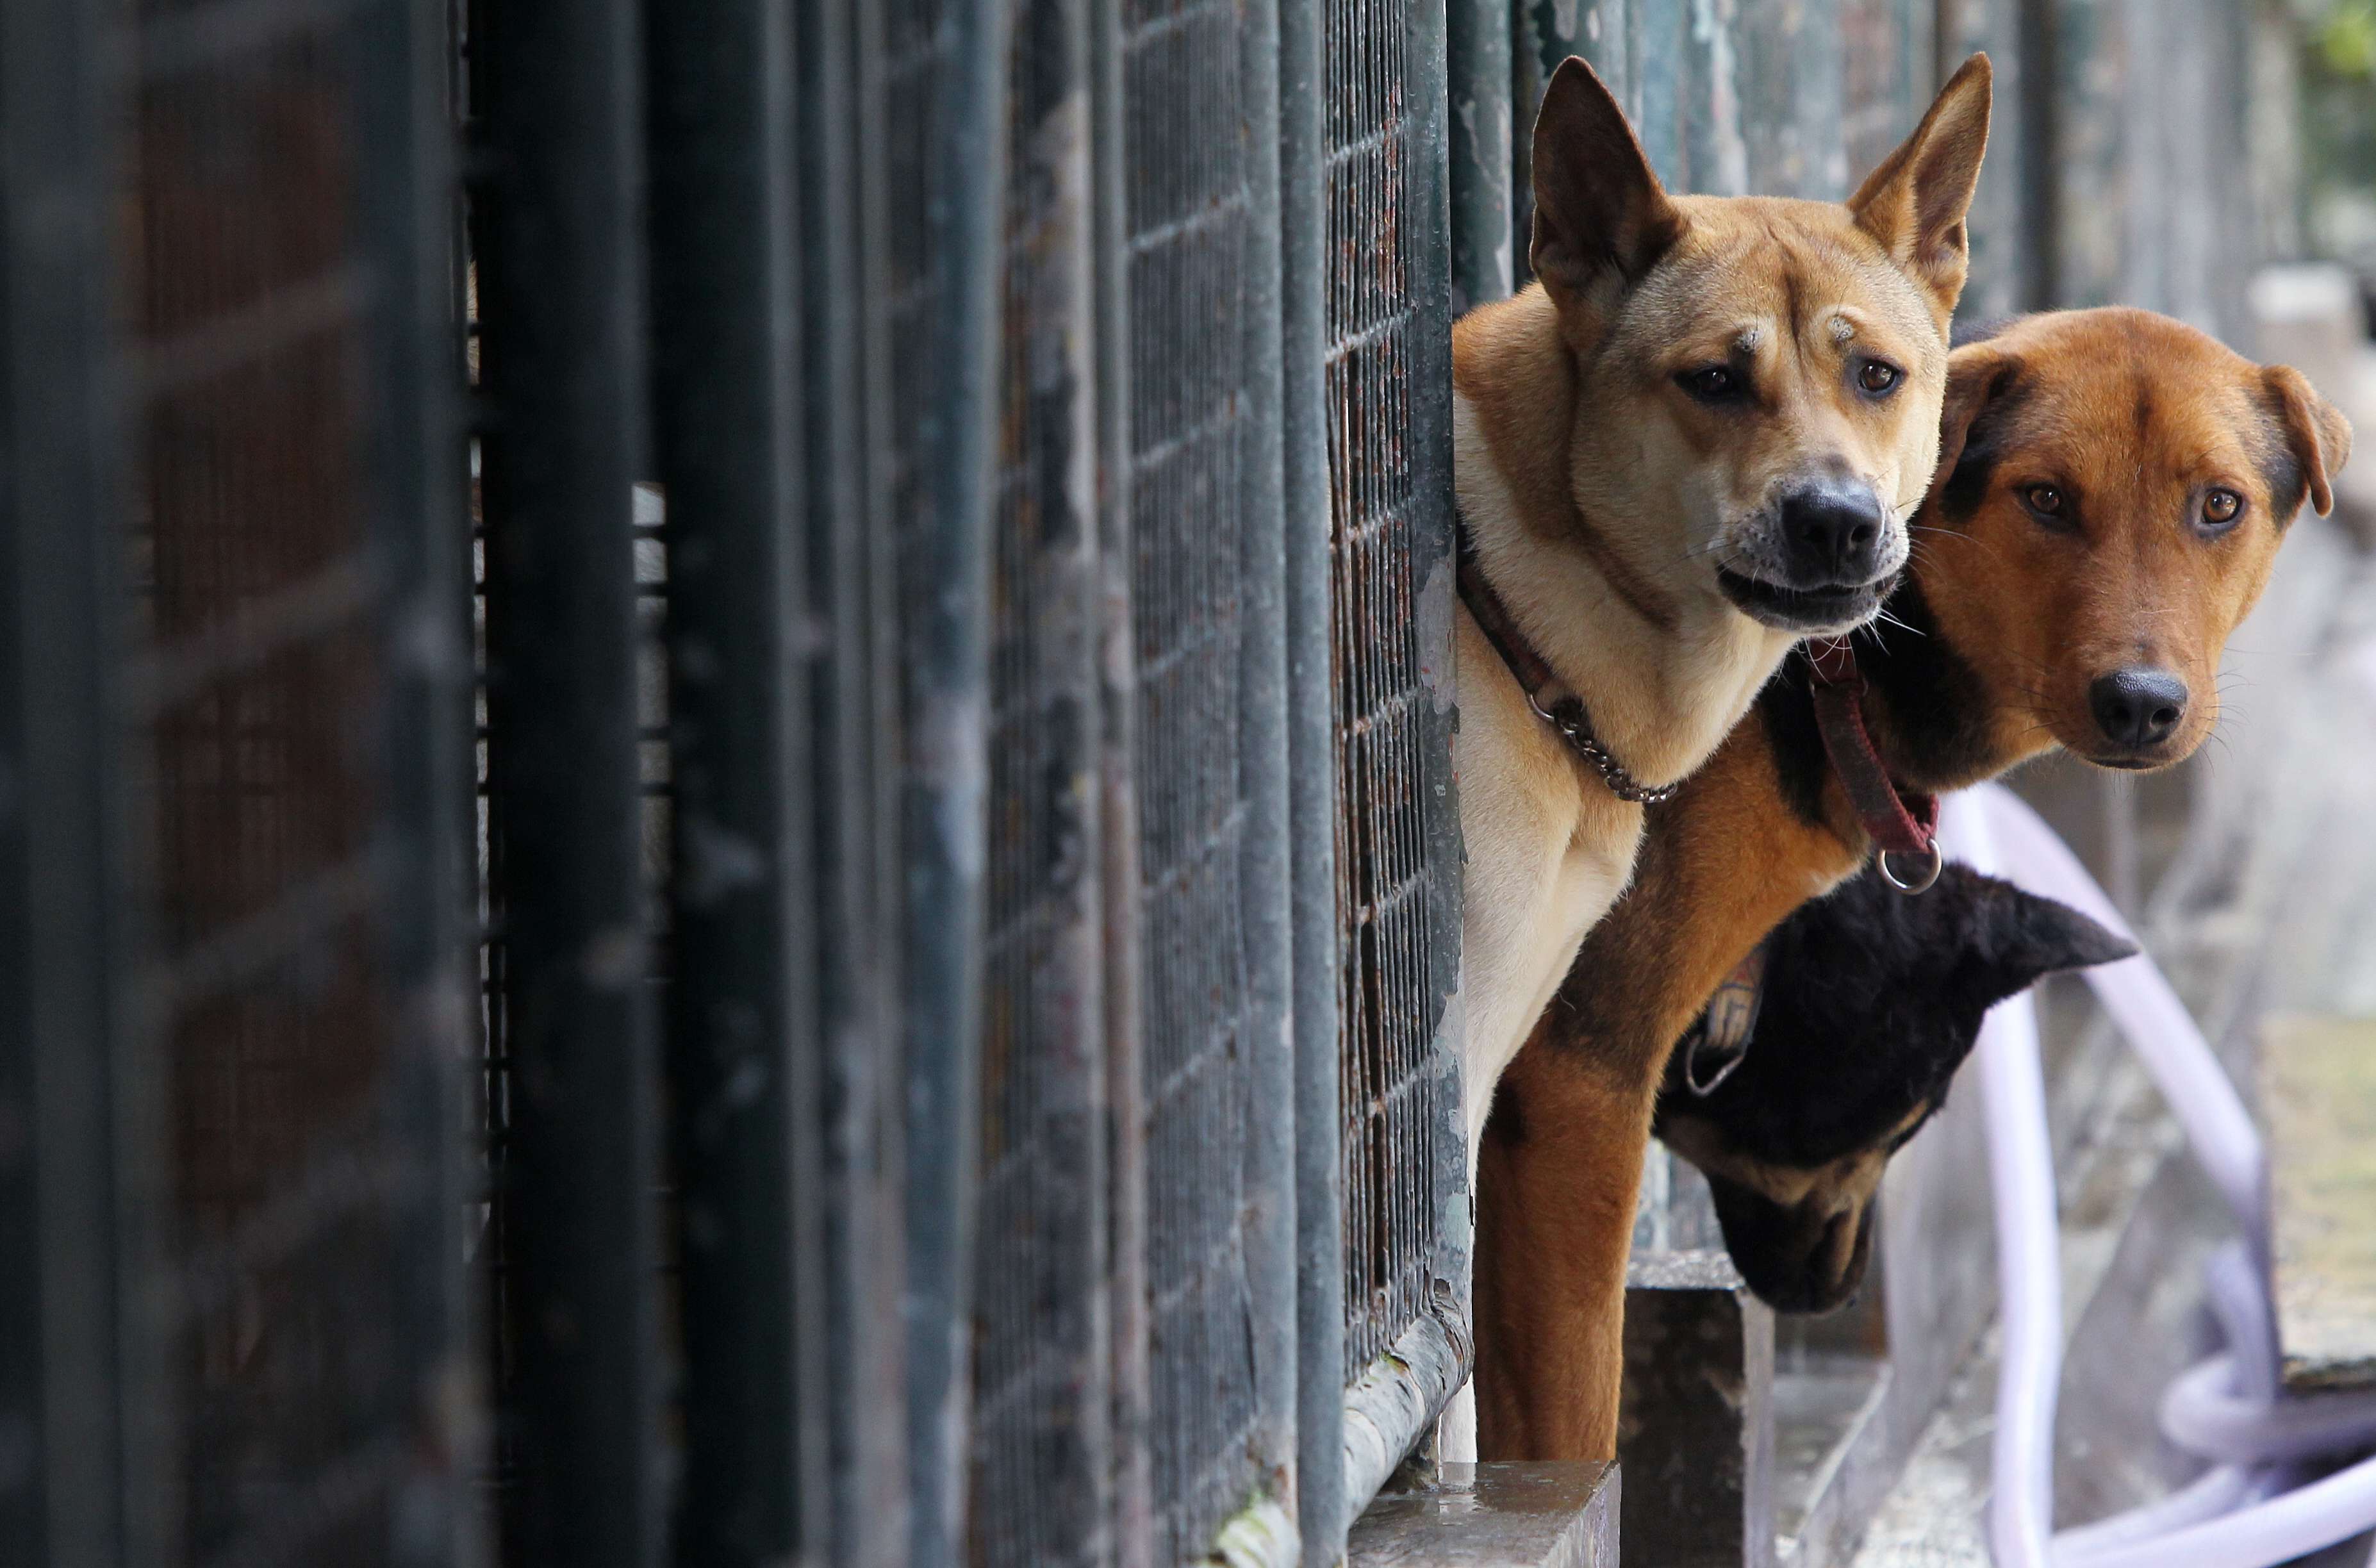 In a city where shelters are full of abandoned and mistreated dogs, activists hope that the tightened laws will be a strong enough deterrent against running a puppy mill. Photo: David Wong